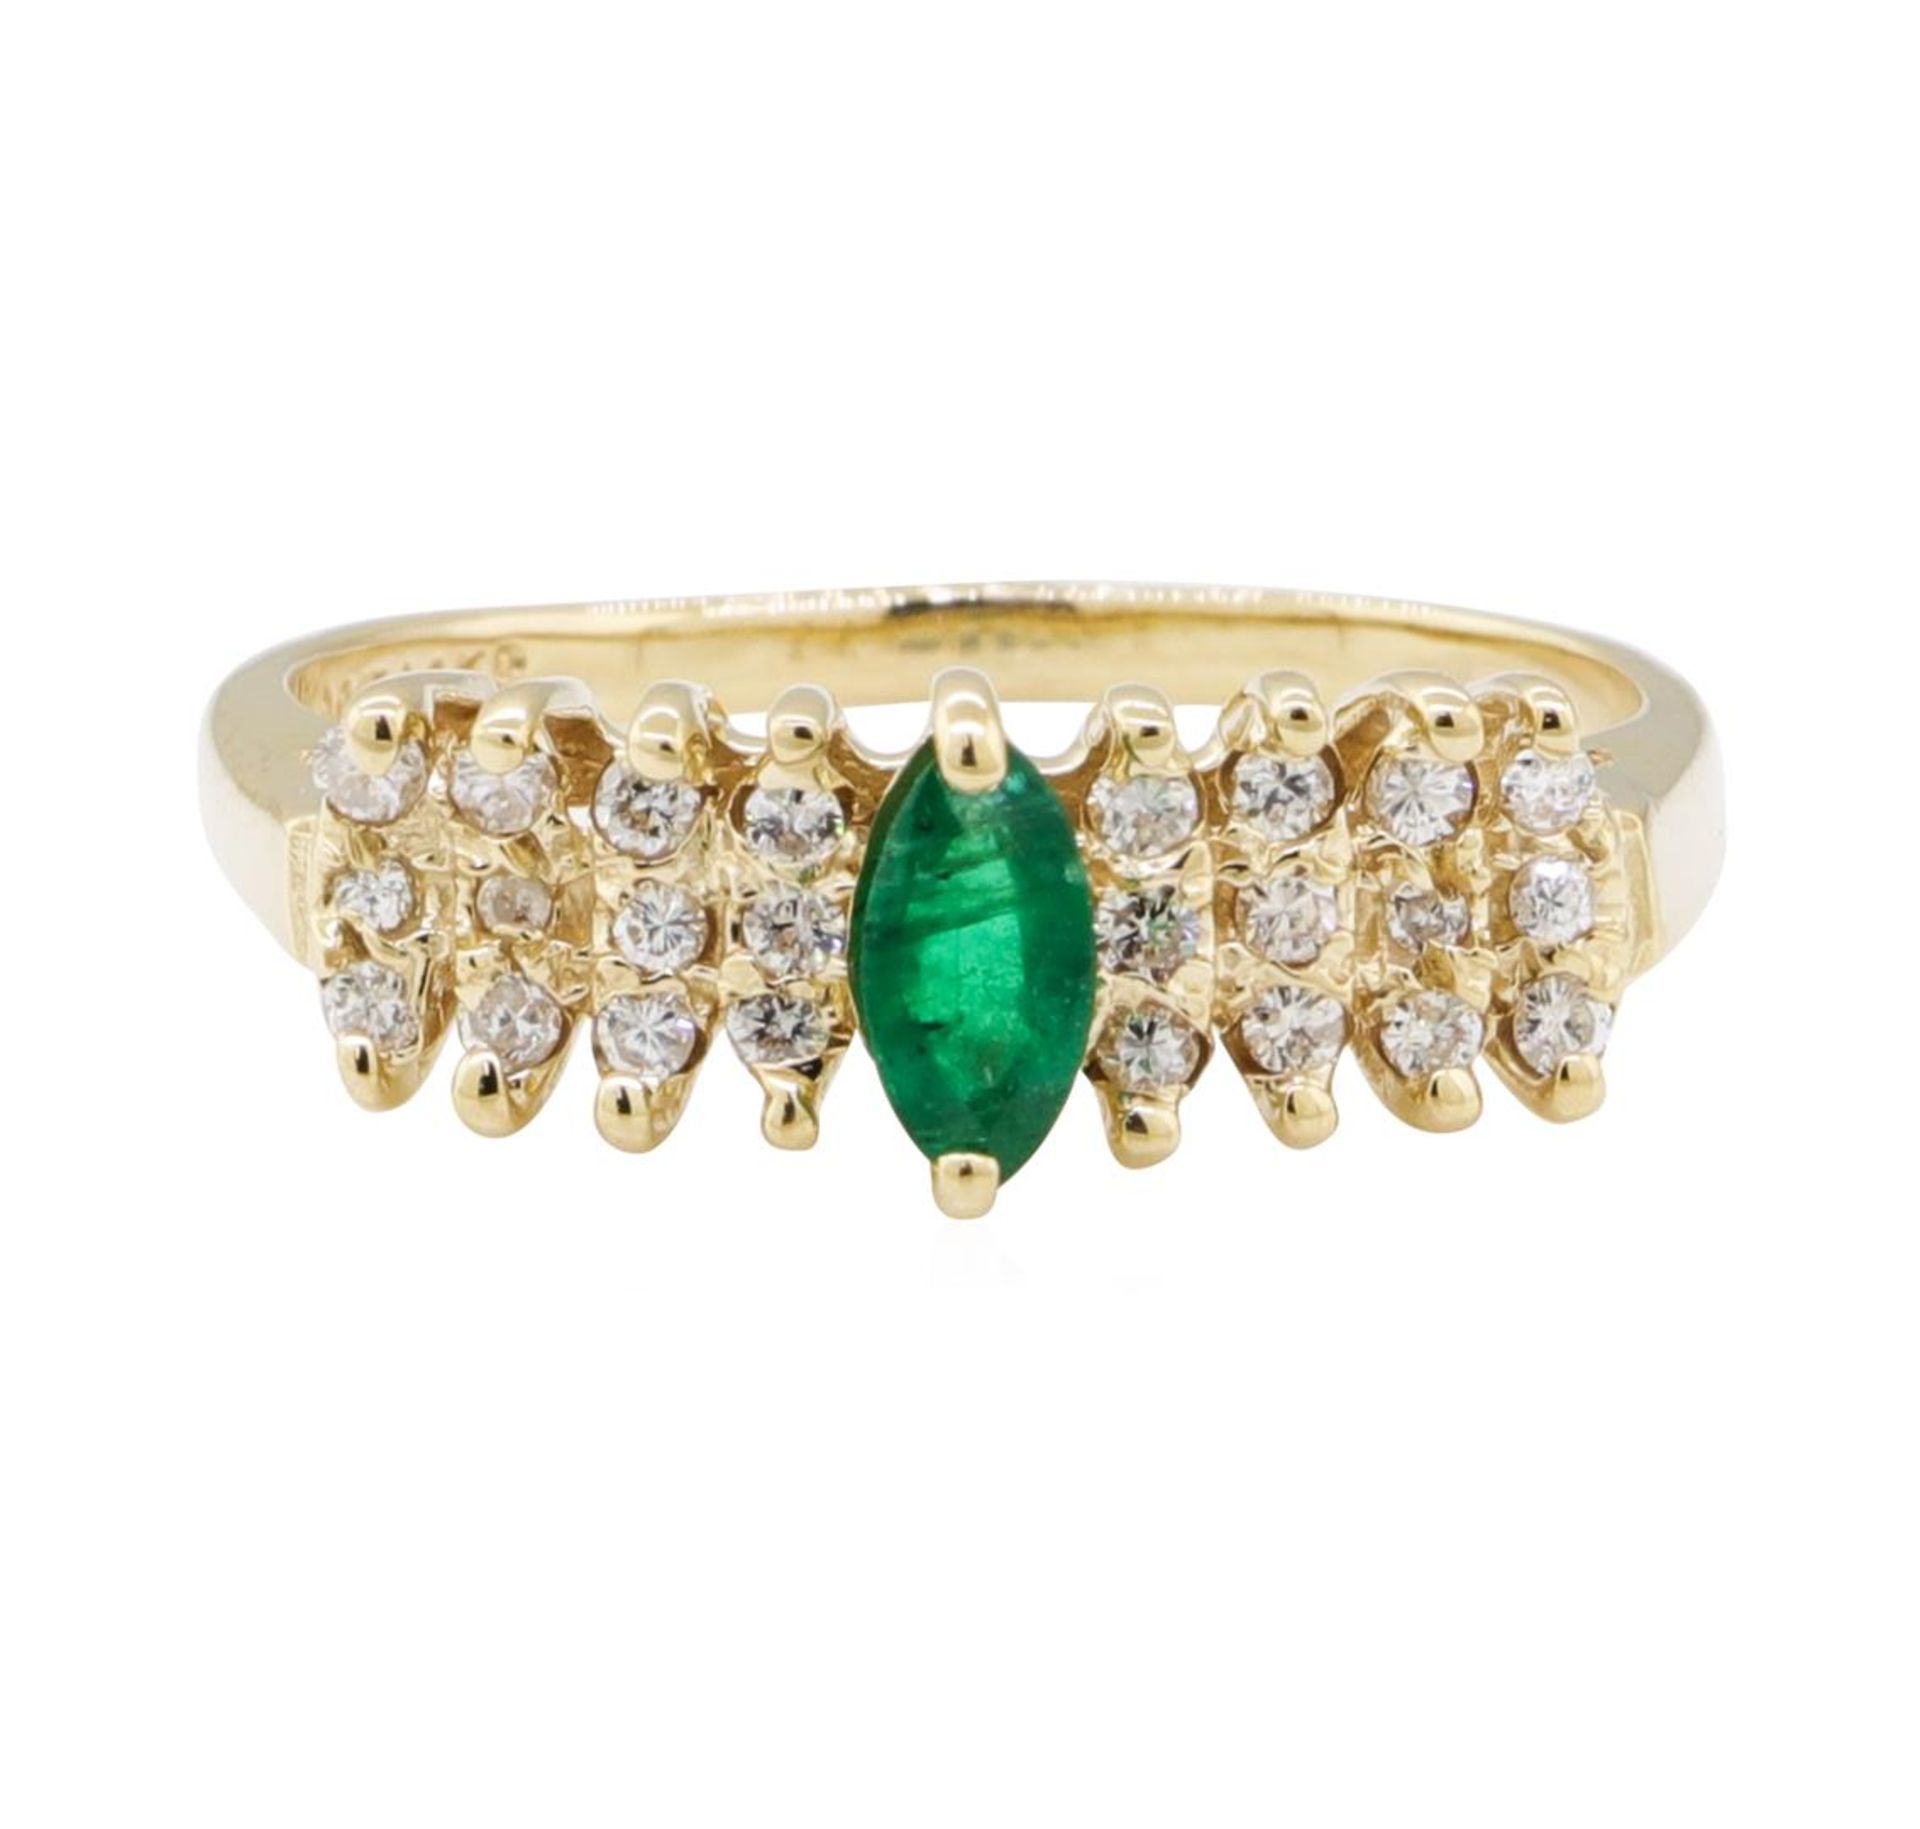 0.50 ctw Diamond and Emerald Ring - 14KT Yellow Gold - Image 2 of 4